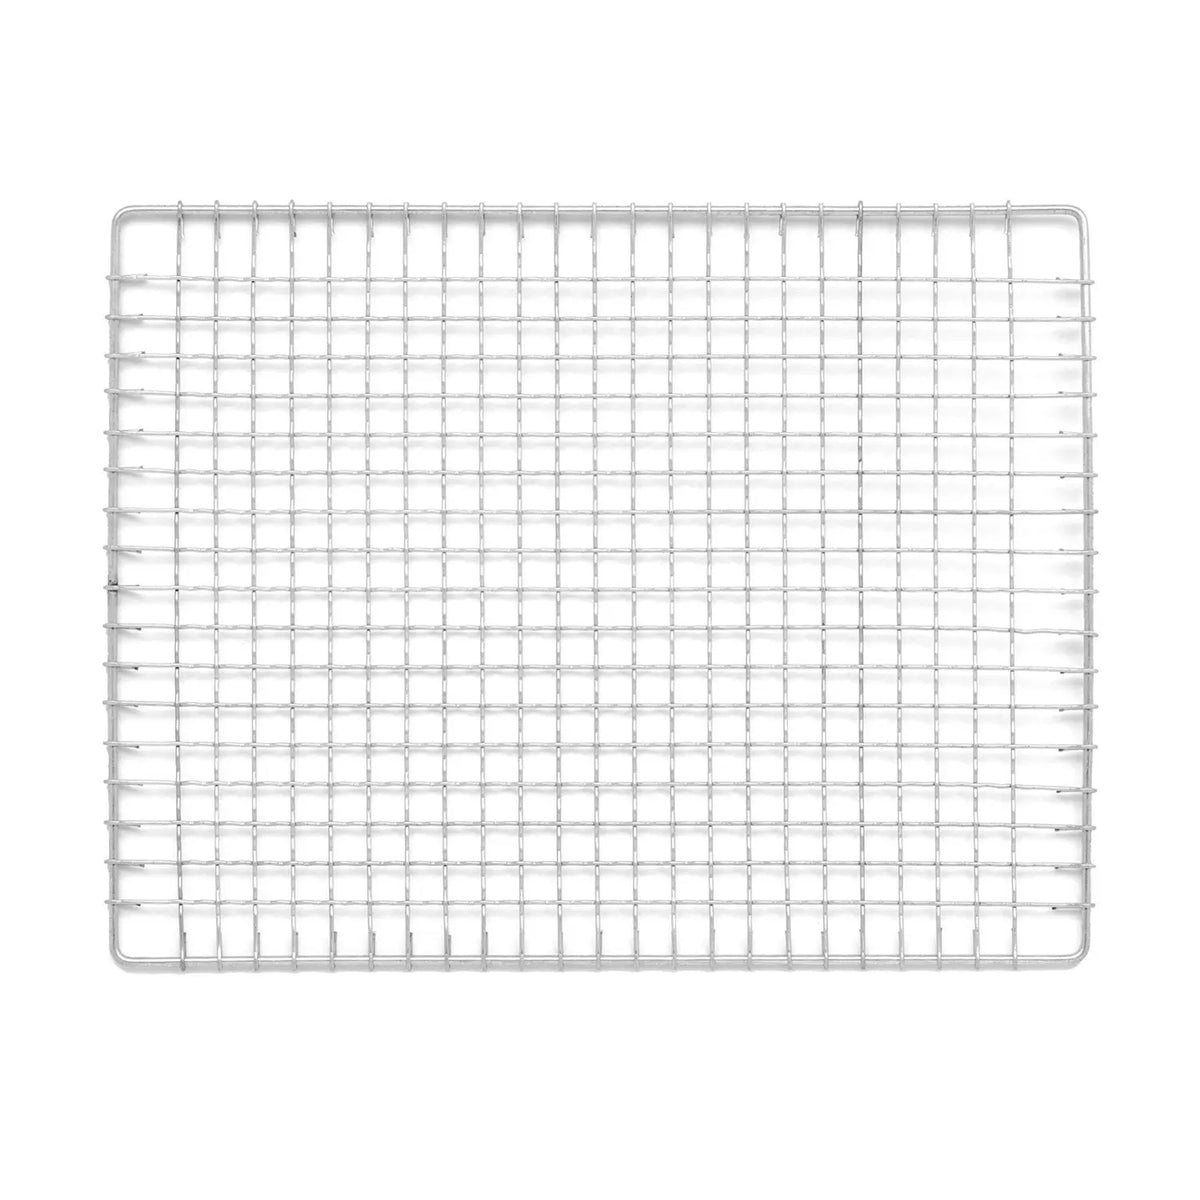 Kaginushi Stainless Steel Barbecue Grill Mesh for BQ8T (3 sheets)